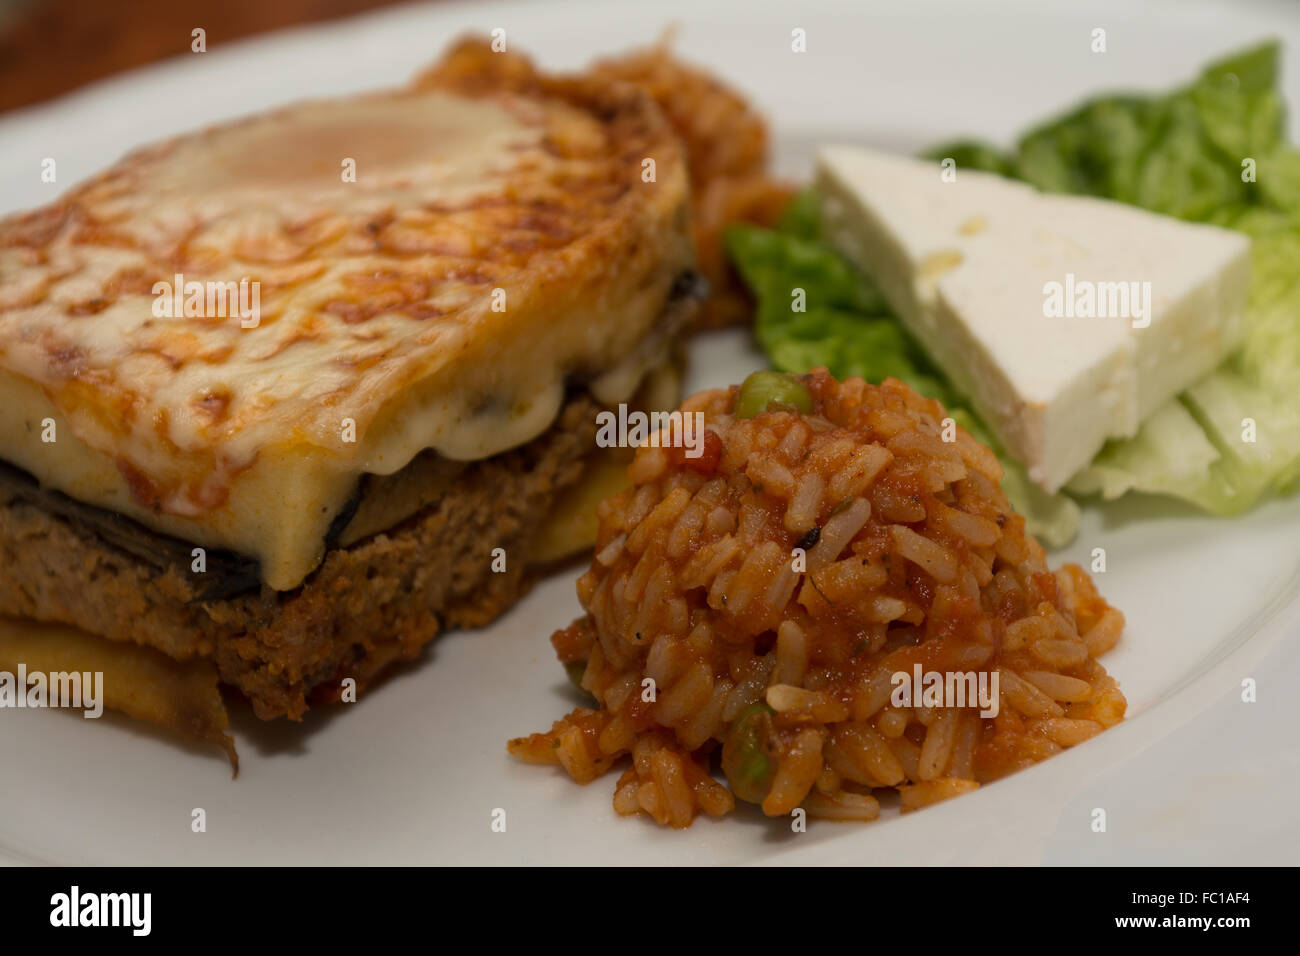 Moussaka delicious served on plate Stock Photo